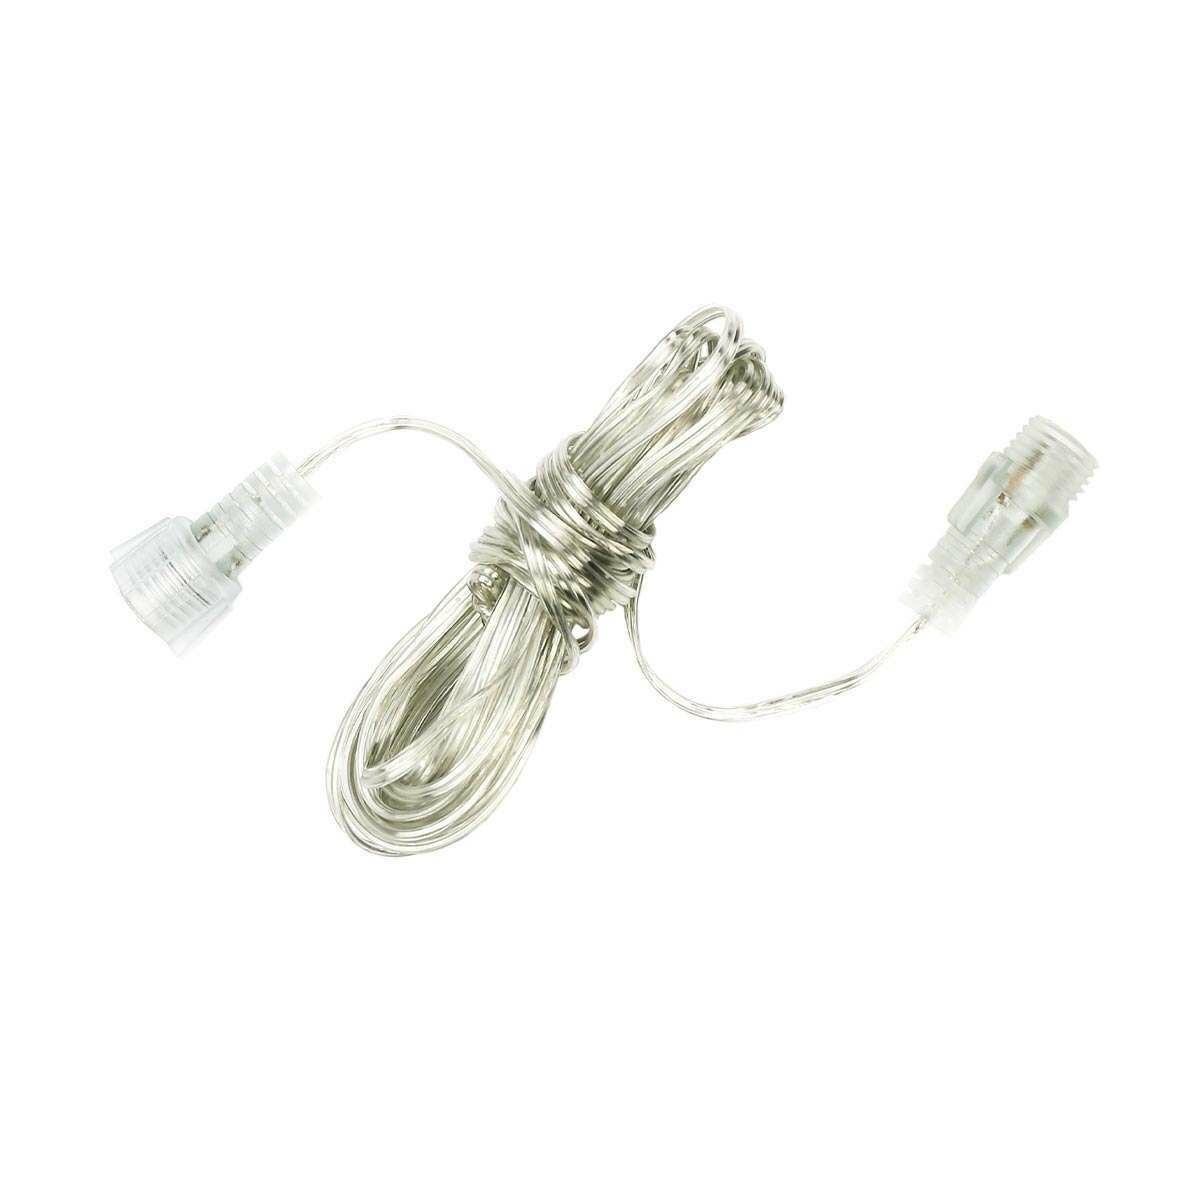 ConnectGo® 5m Extension, Clear Cable image 1